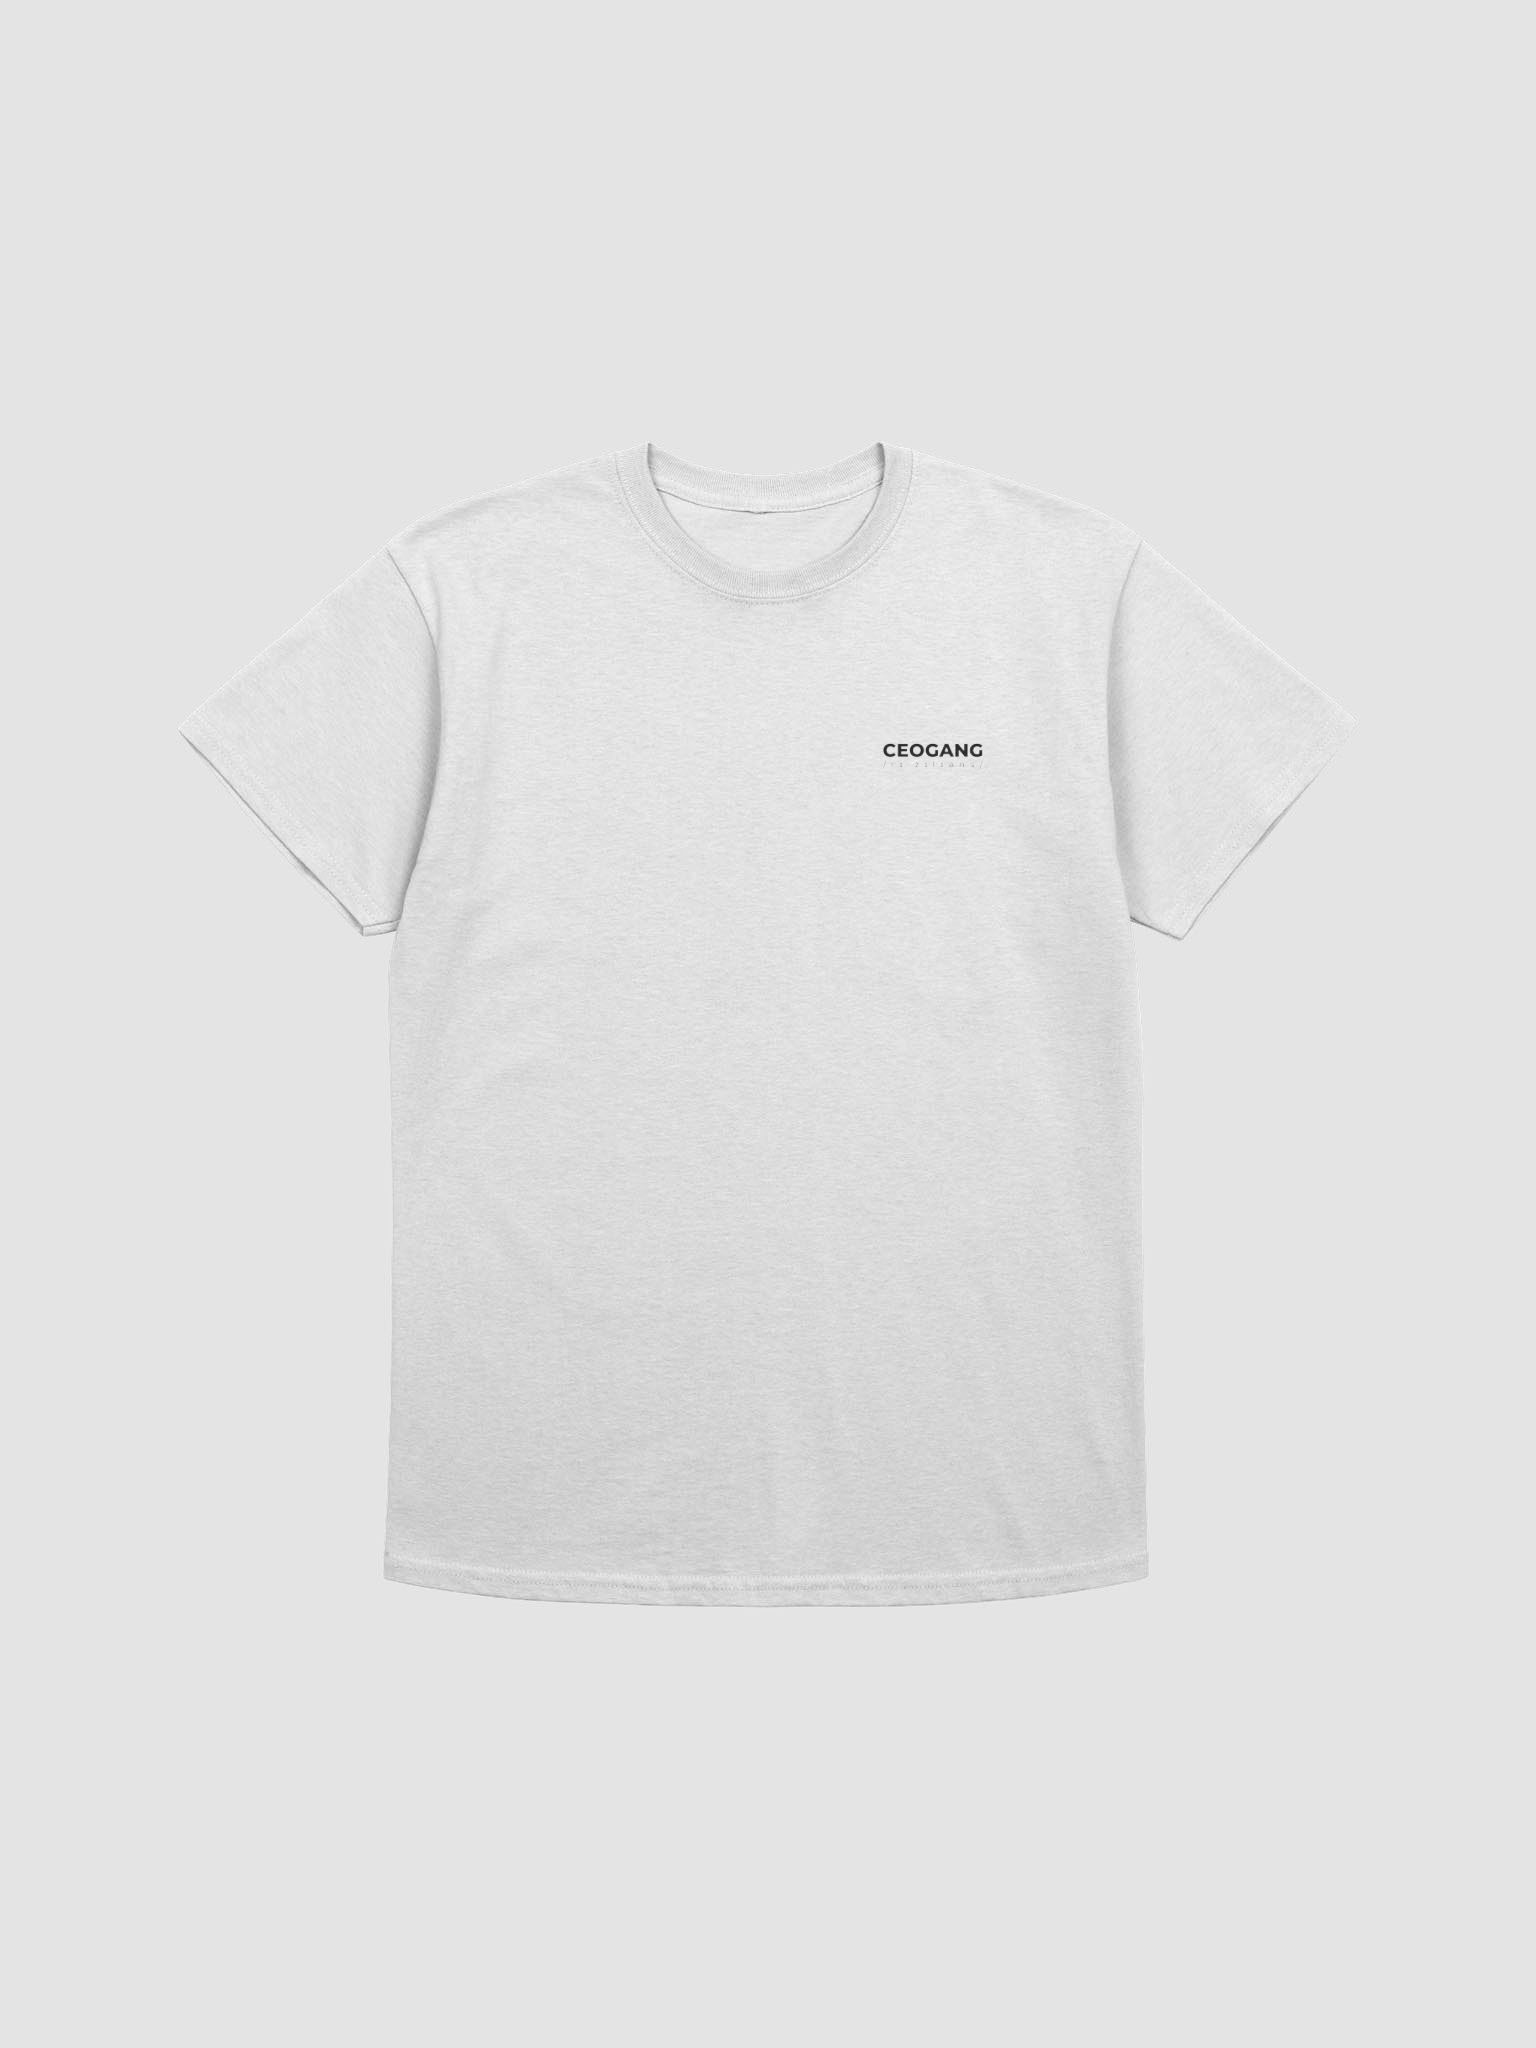 resilience T - light colors | studytme merch